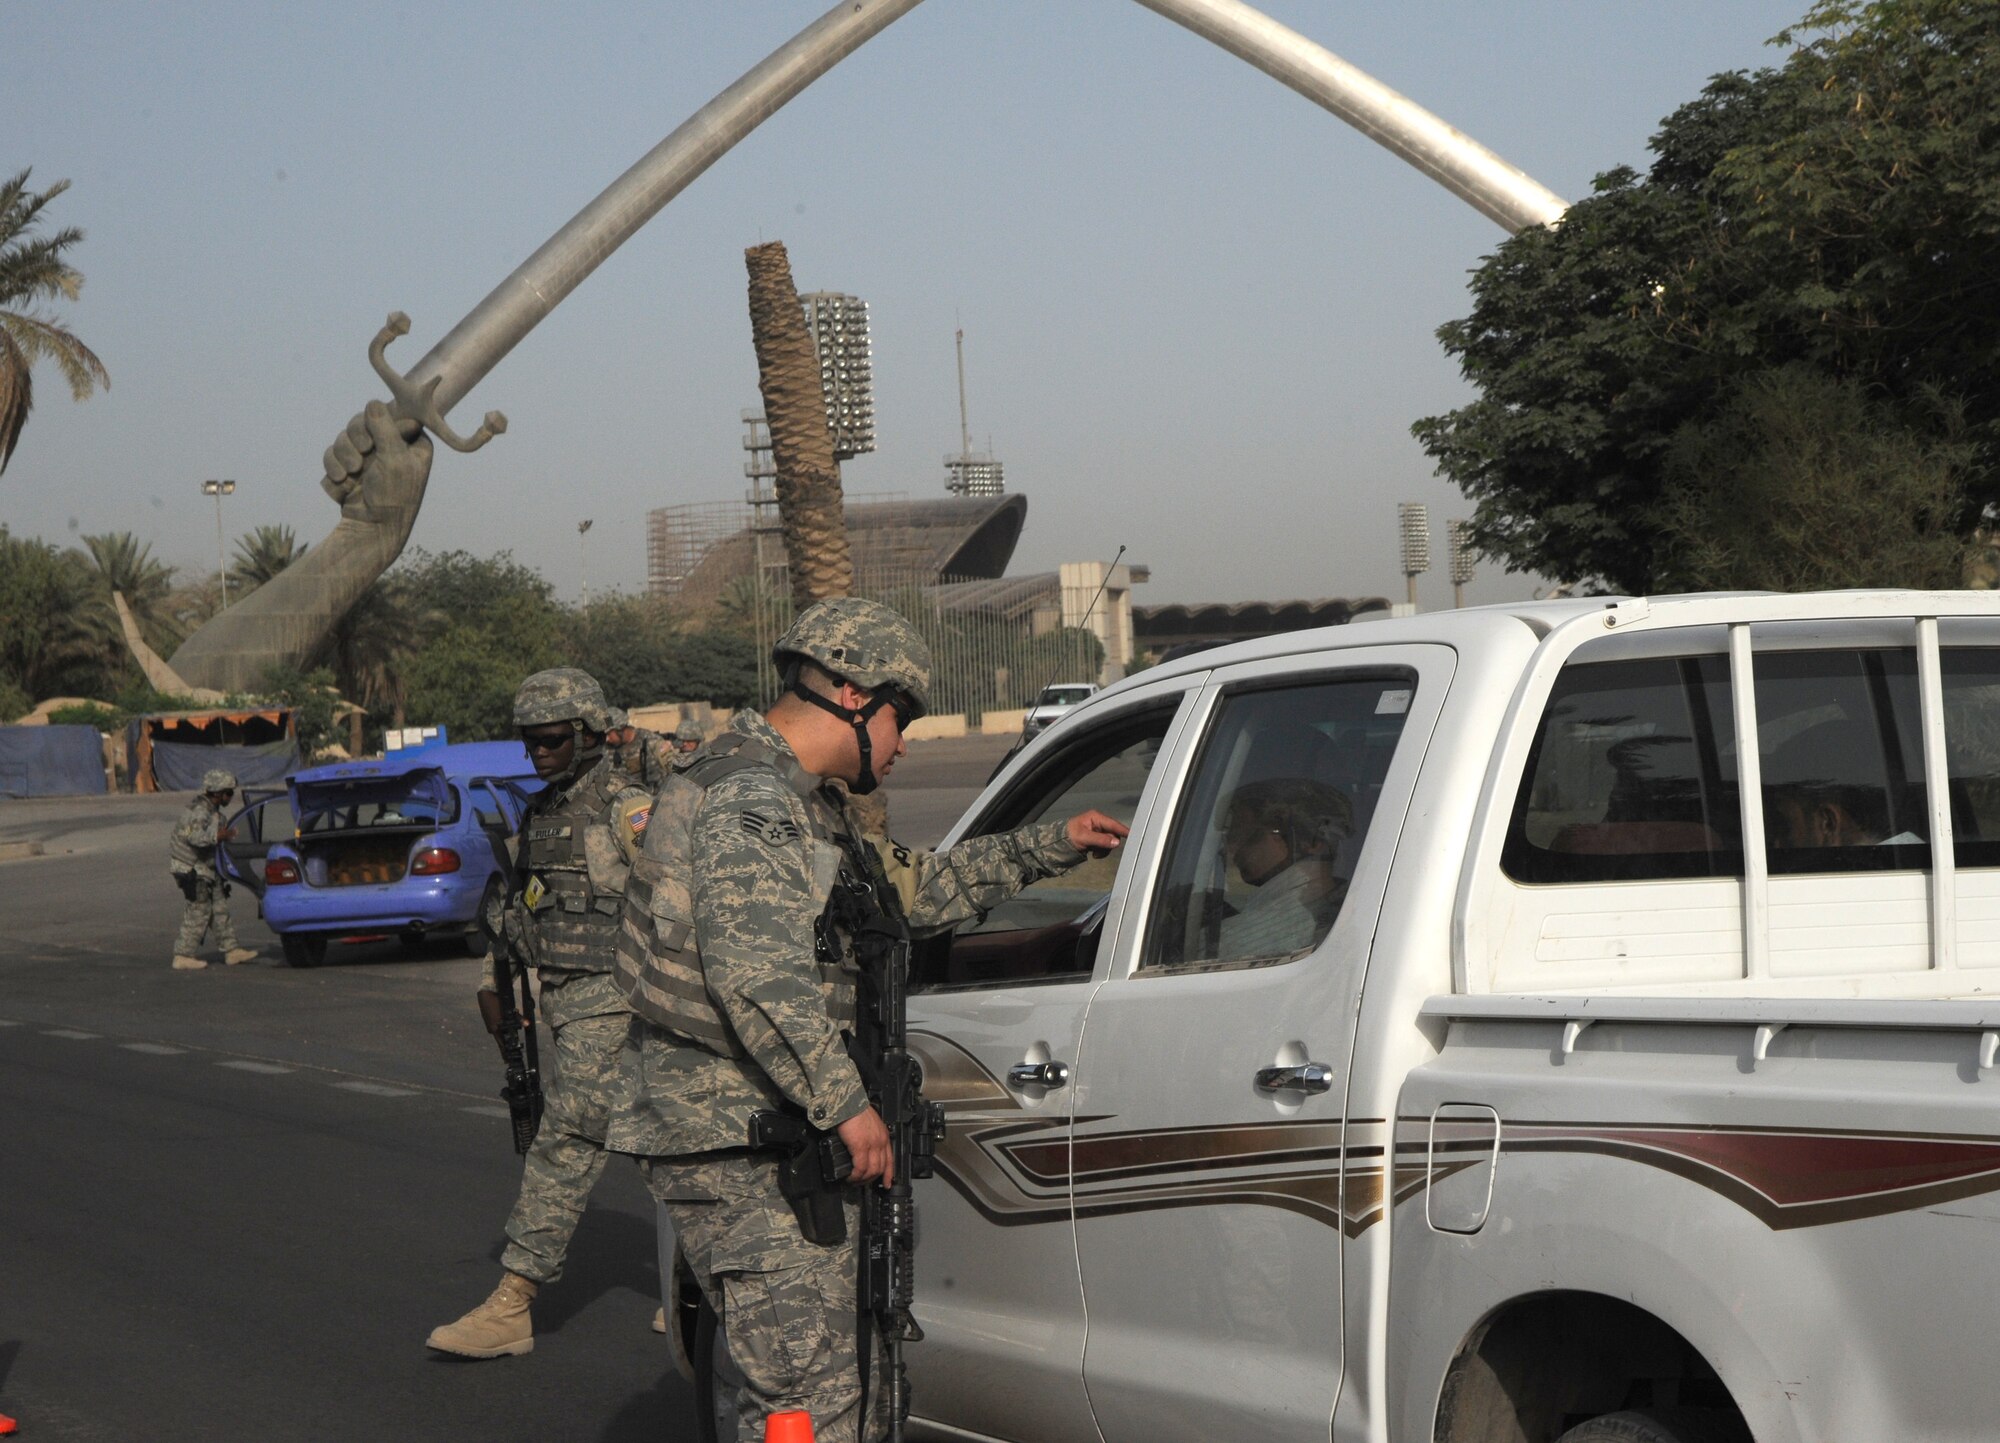 INTERNATIONAL ZONE, Baghdad, Iraq -- Members of the 732nd Expeditionary Security Forces Squadron, Detachment 4, perform traffic control point checks in the International Zone May 28. The TCPs are only one tool the defenders use to patrol and protect the IZ. (U.S. Air Force photo/Tech. Sgt. Amanda Callahan)